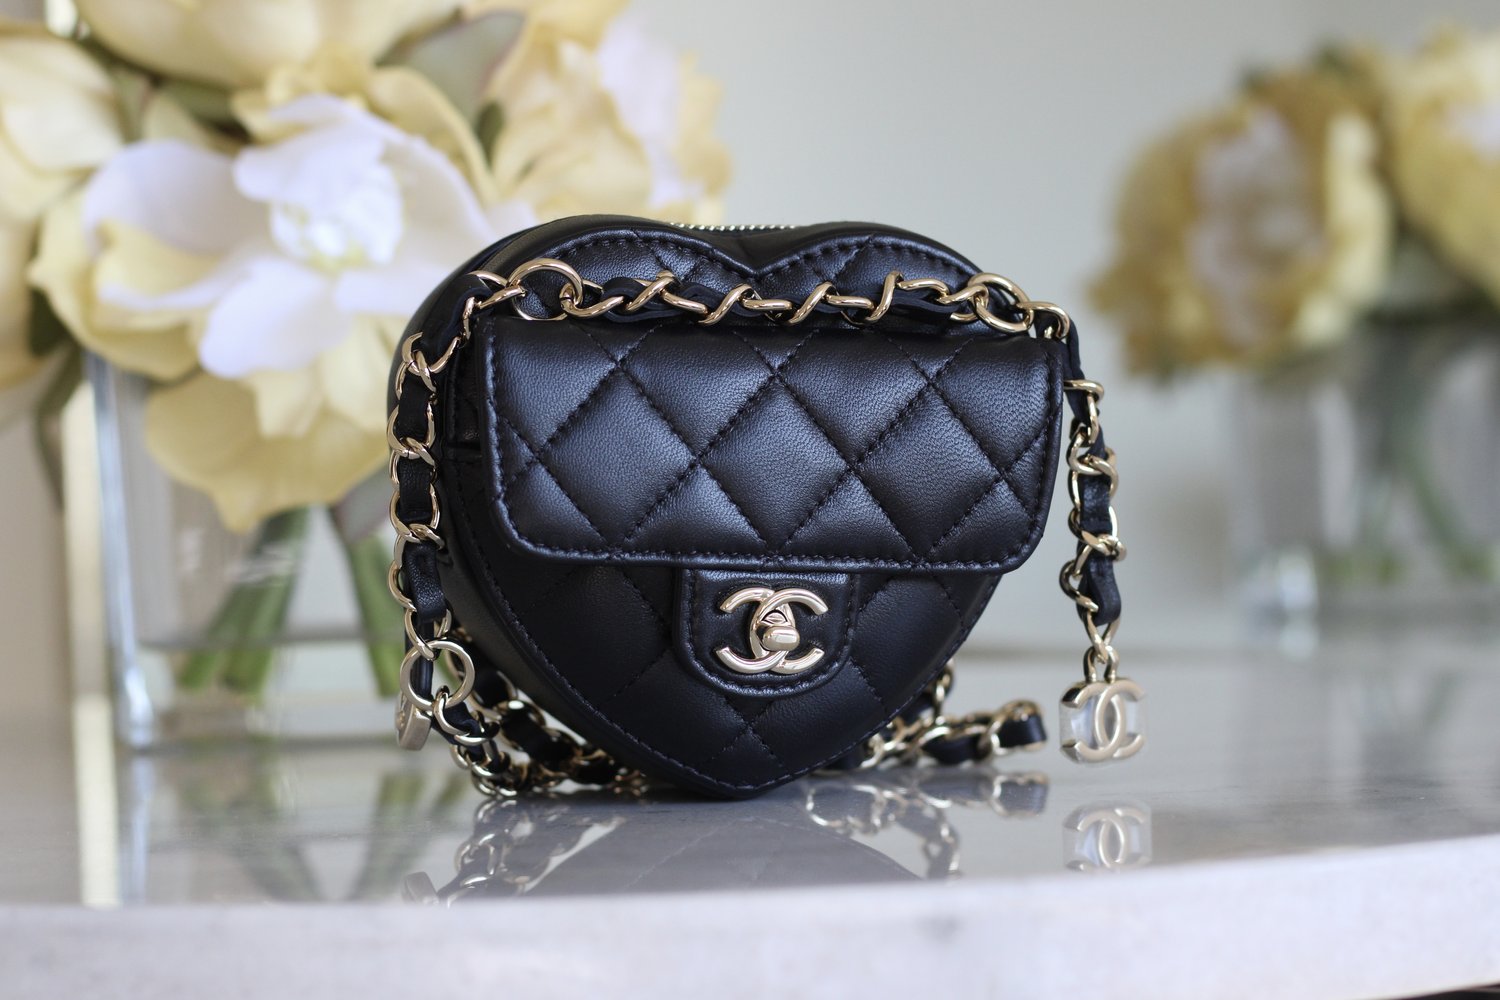 Chanel Waist Bag, 22S, BLack Caviar Leather, Gold Hardware, New in Box